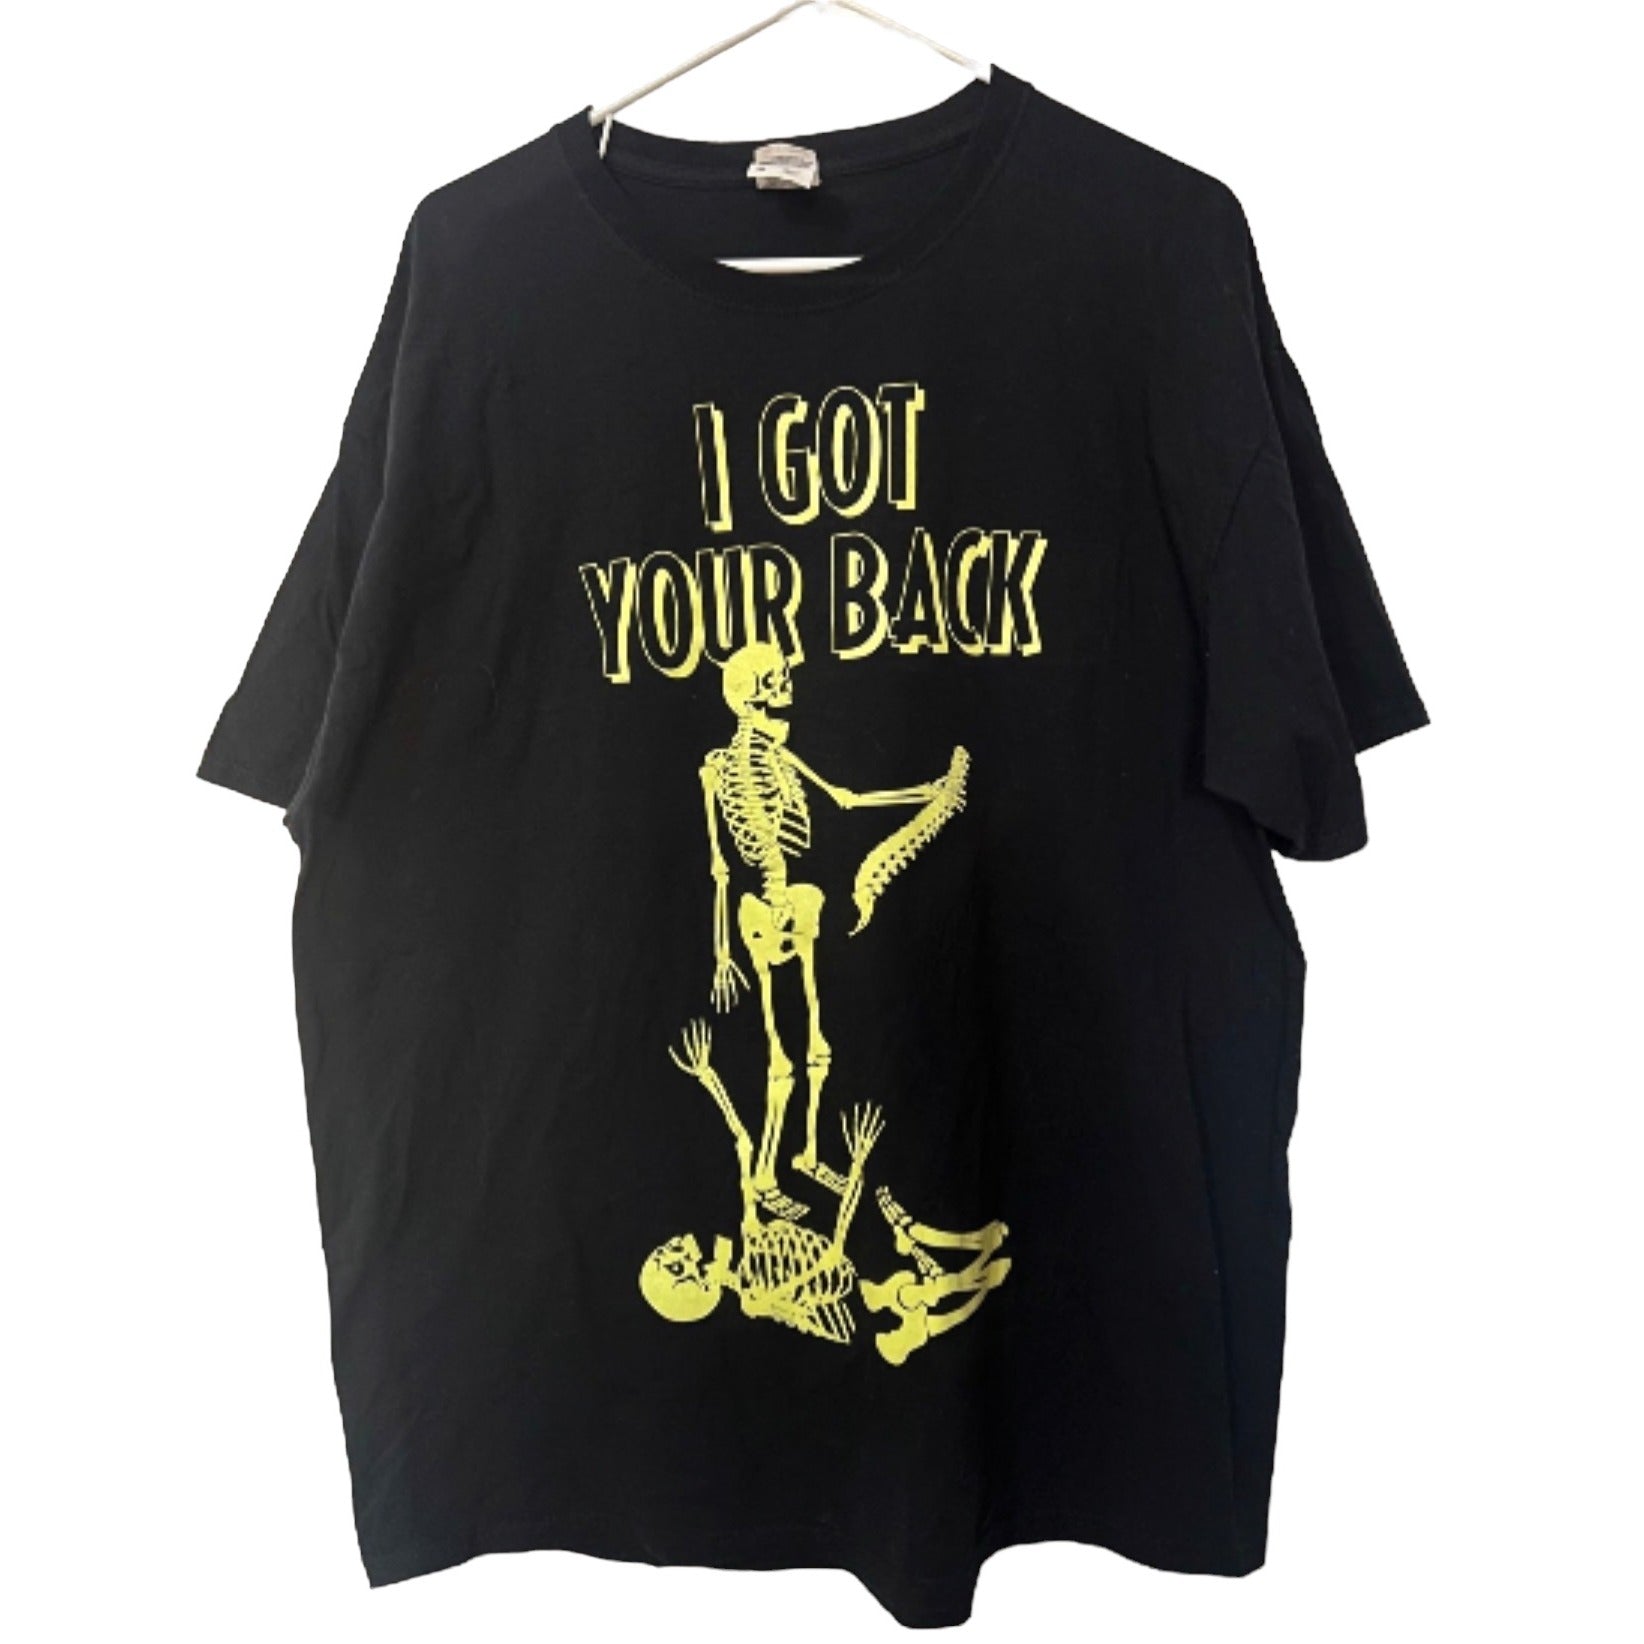 Fruit of the Loom Glow In the Dark  "I Got Your Back" Graphic Tshirt Sz XL GLOWS in the dark Black Humorous T-Shirt